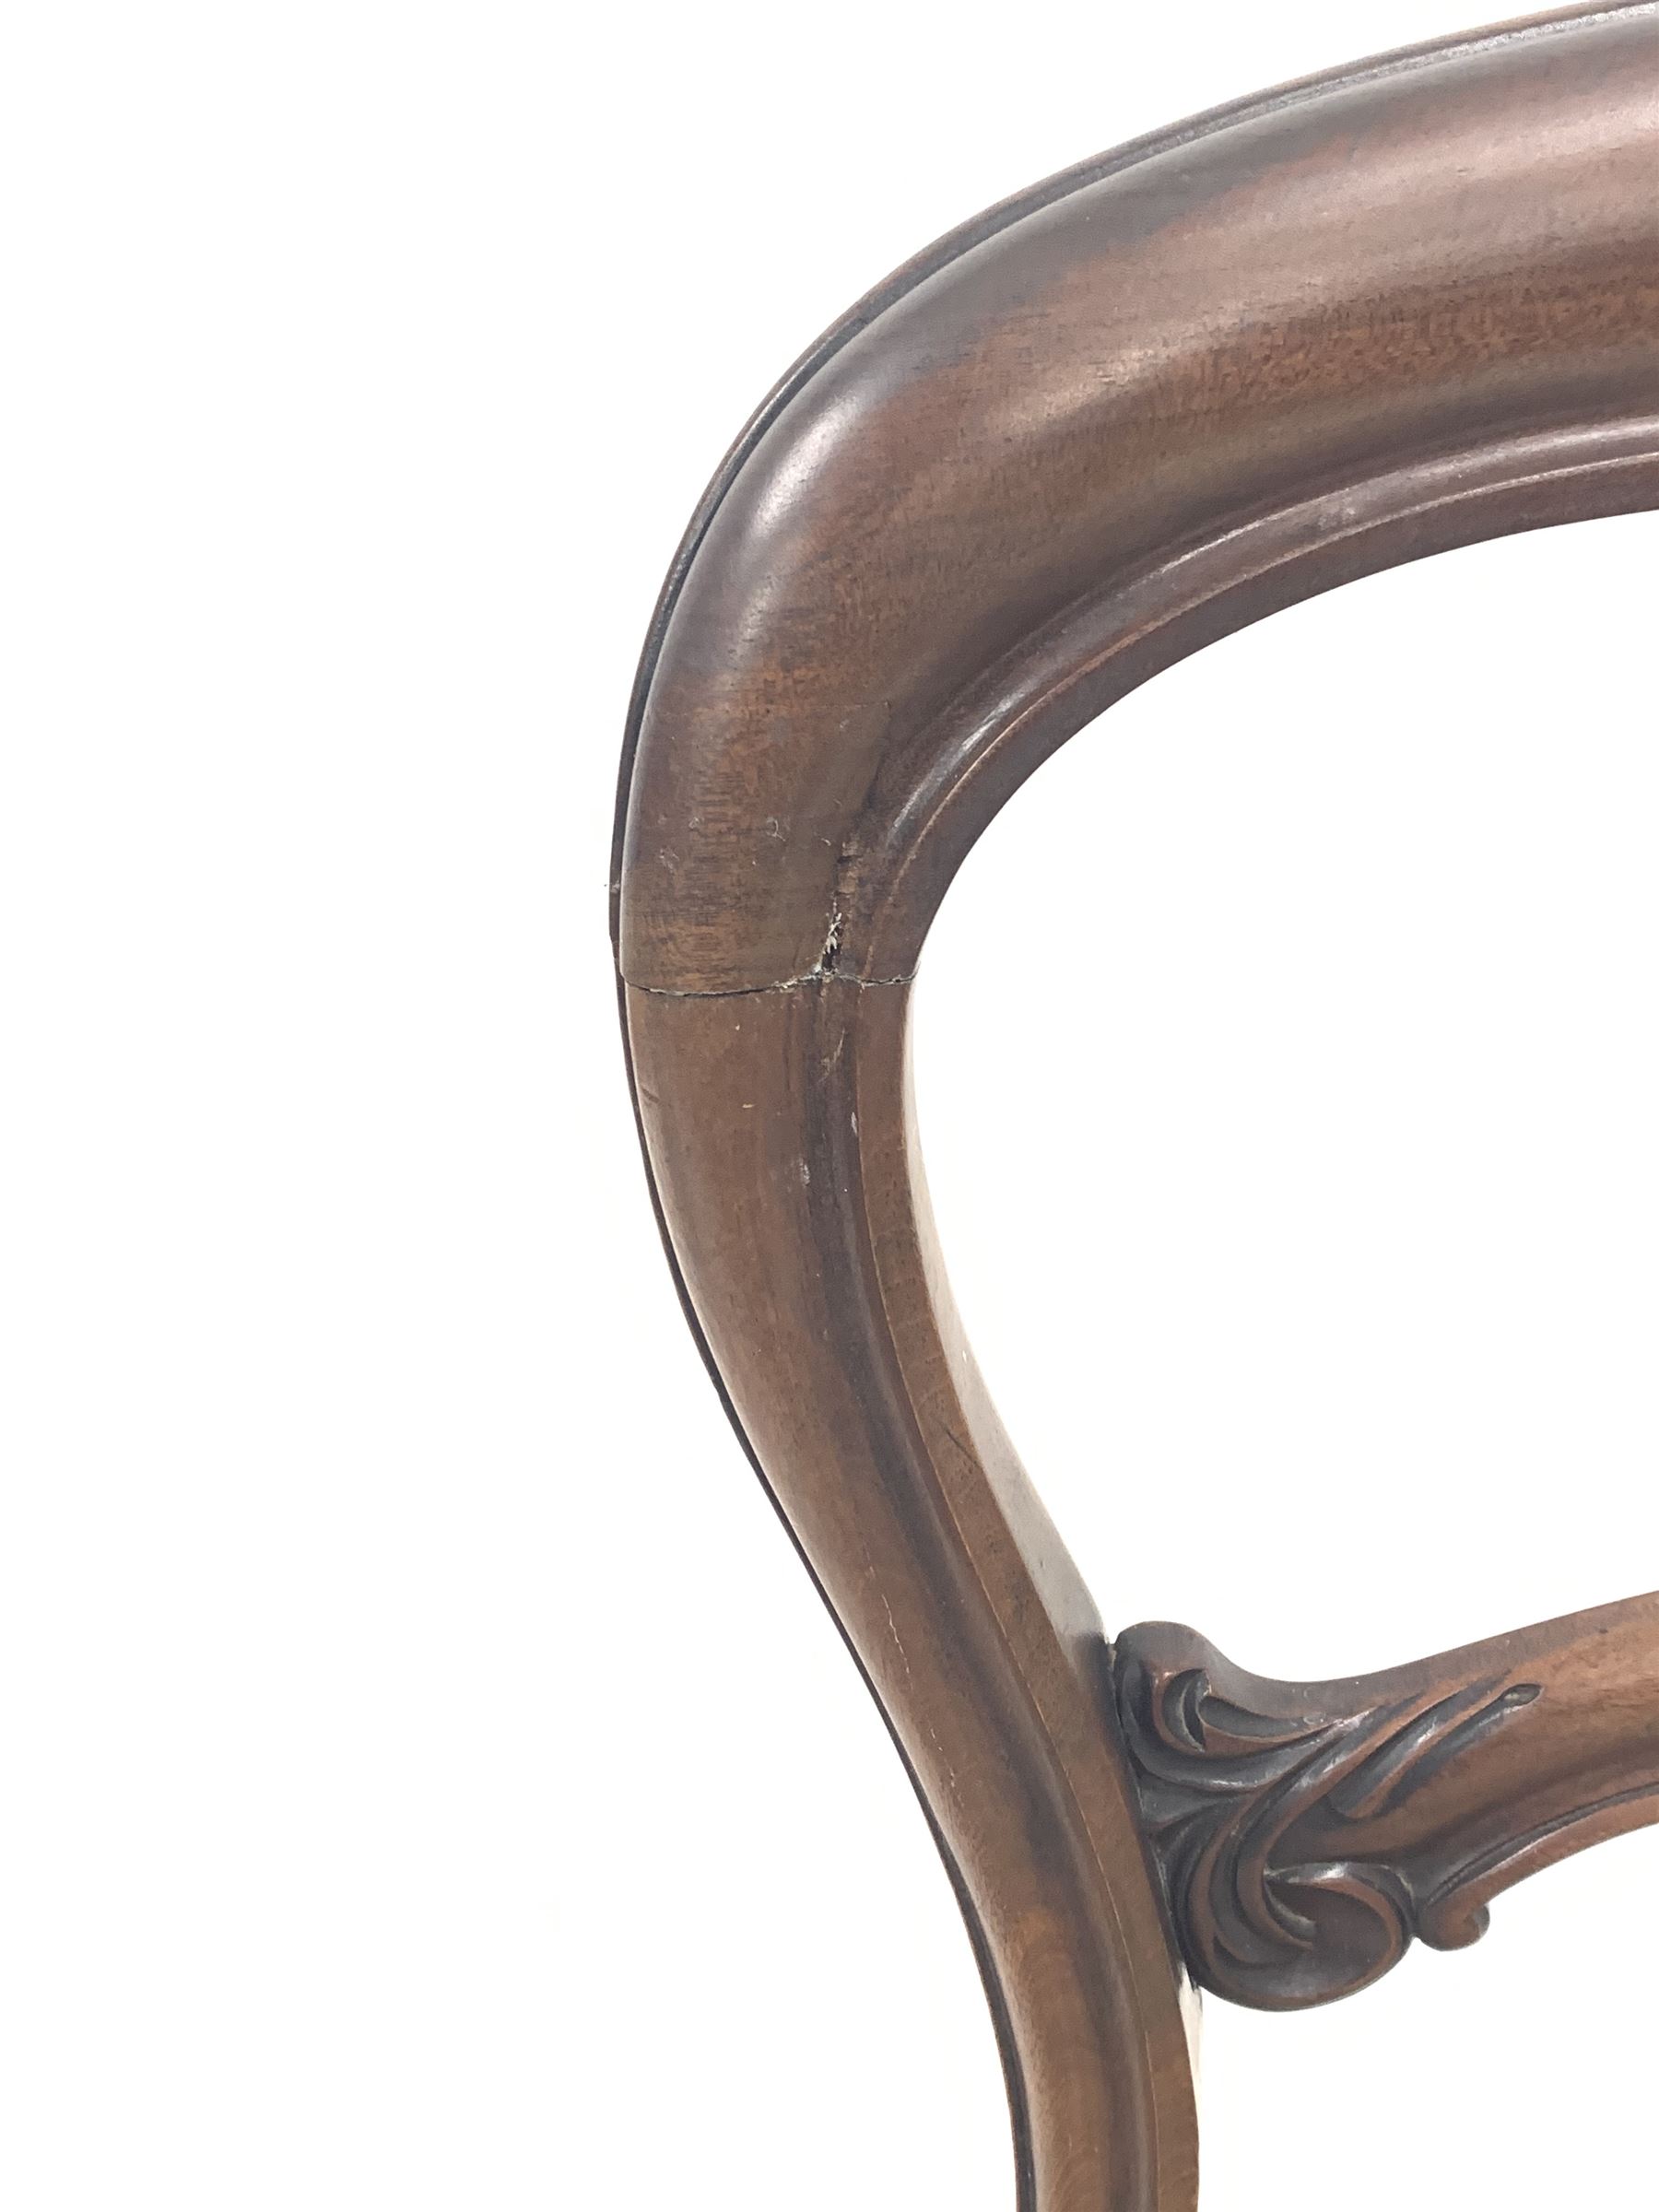 Set of four Victorian dining chairs with balloon backs and scroll leaf carved rails - Image 3 of 3